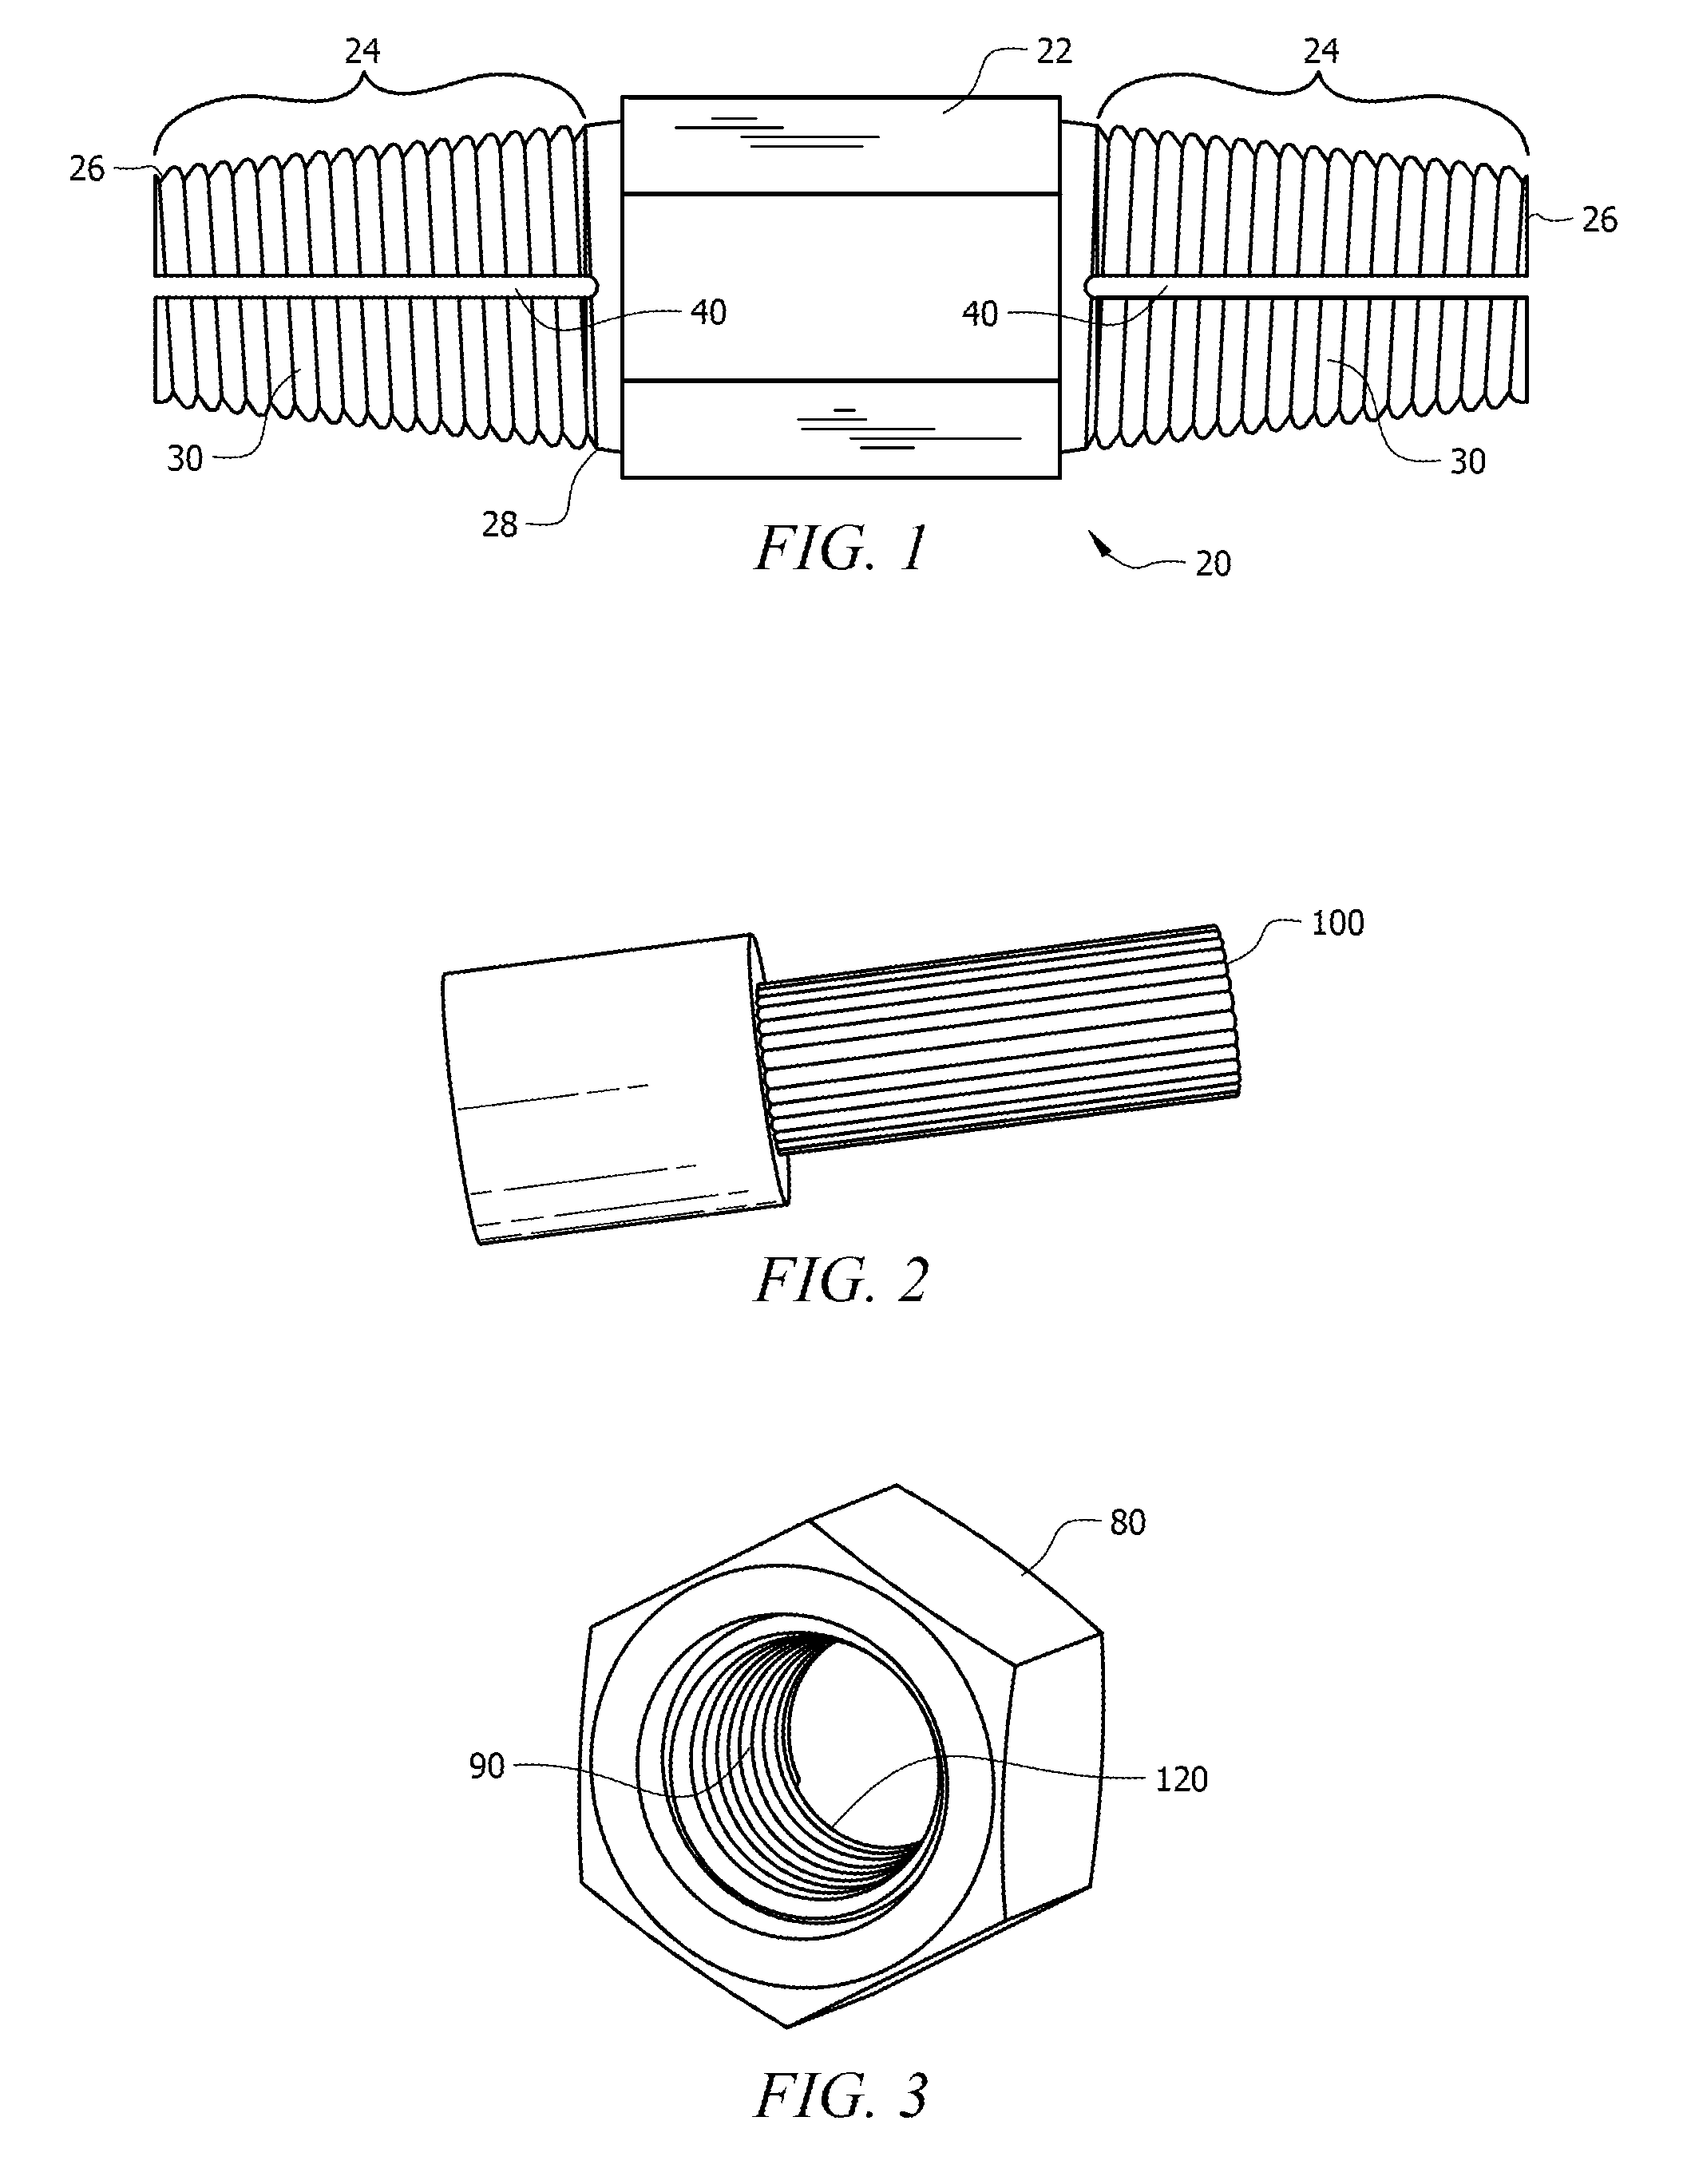 Connector device for joining multiple conductors